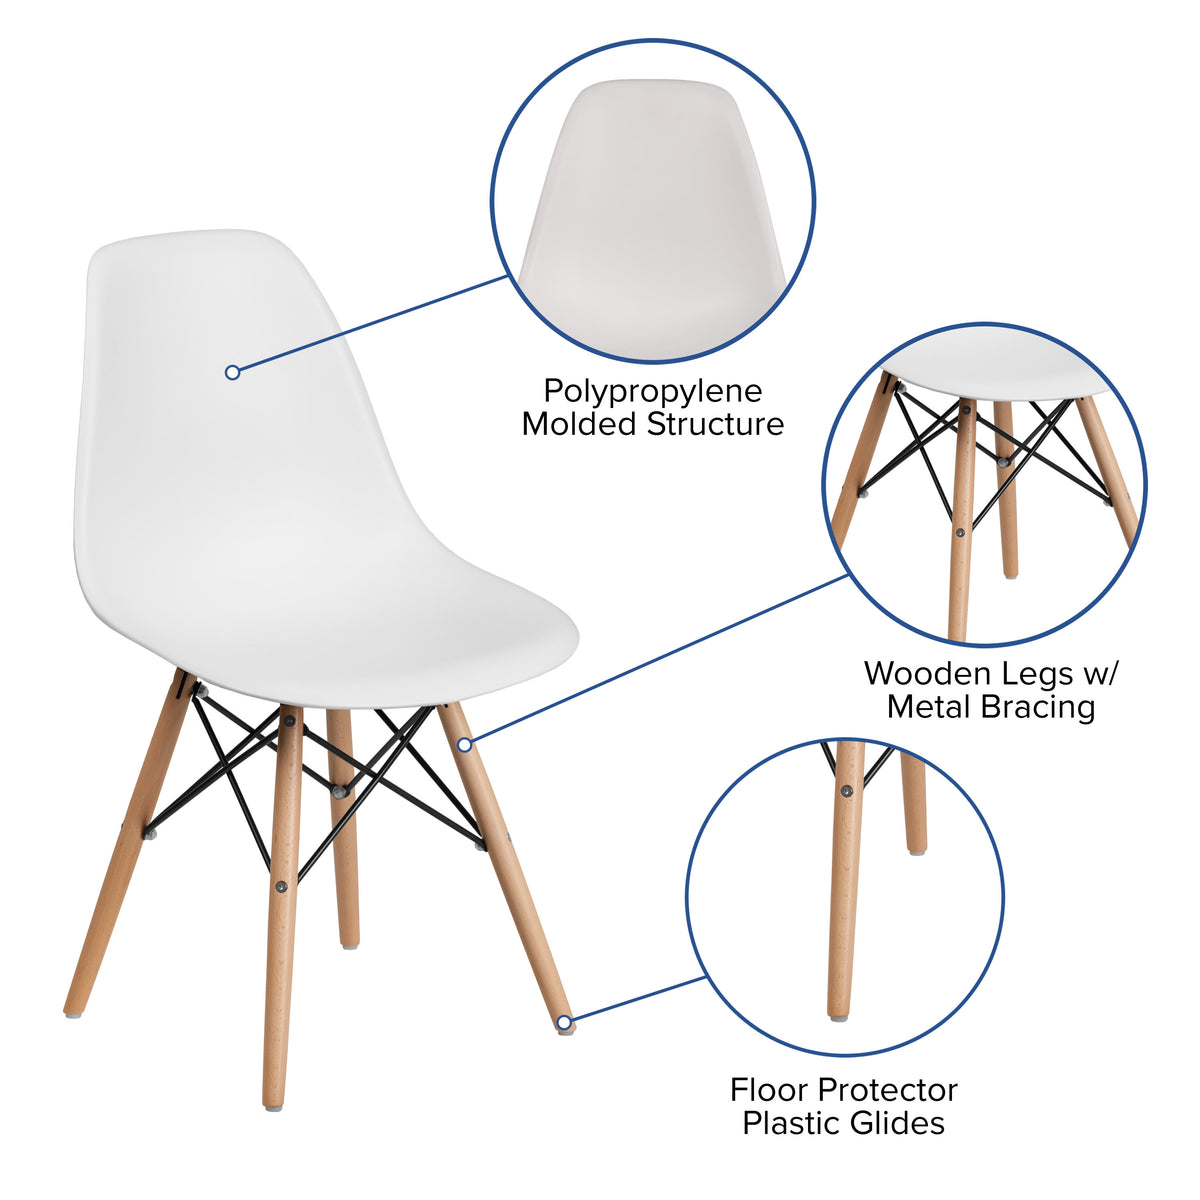 White |#| White Plastic Chair with Wooden Legs - Hospitality Seating - Side Chair